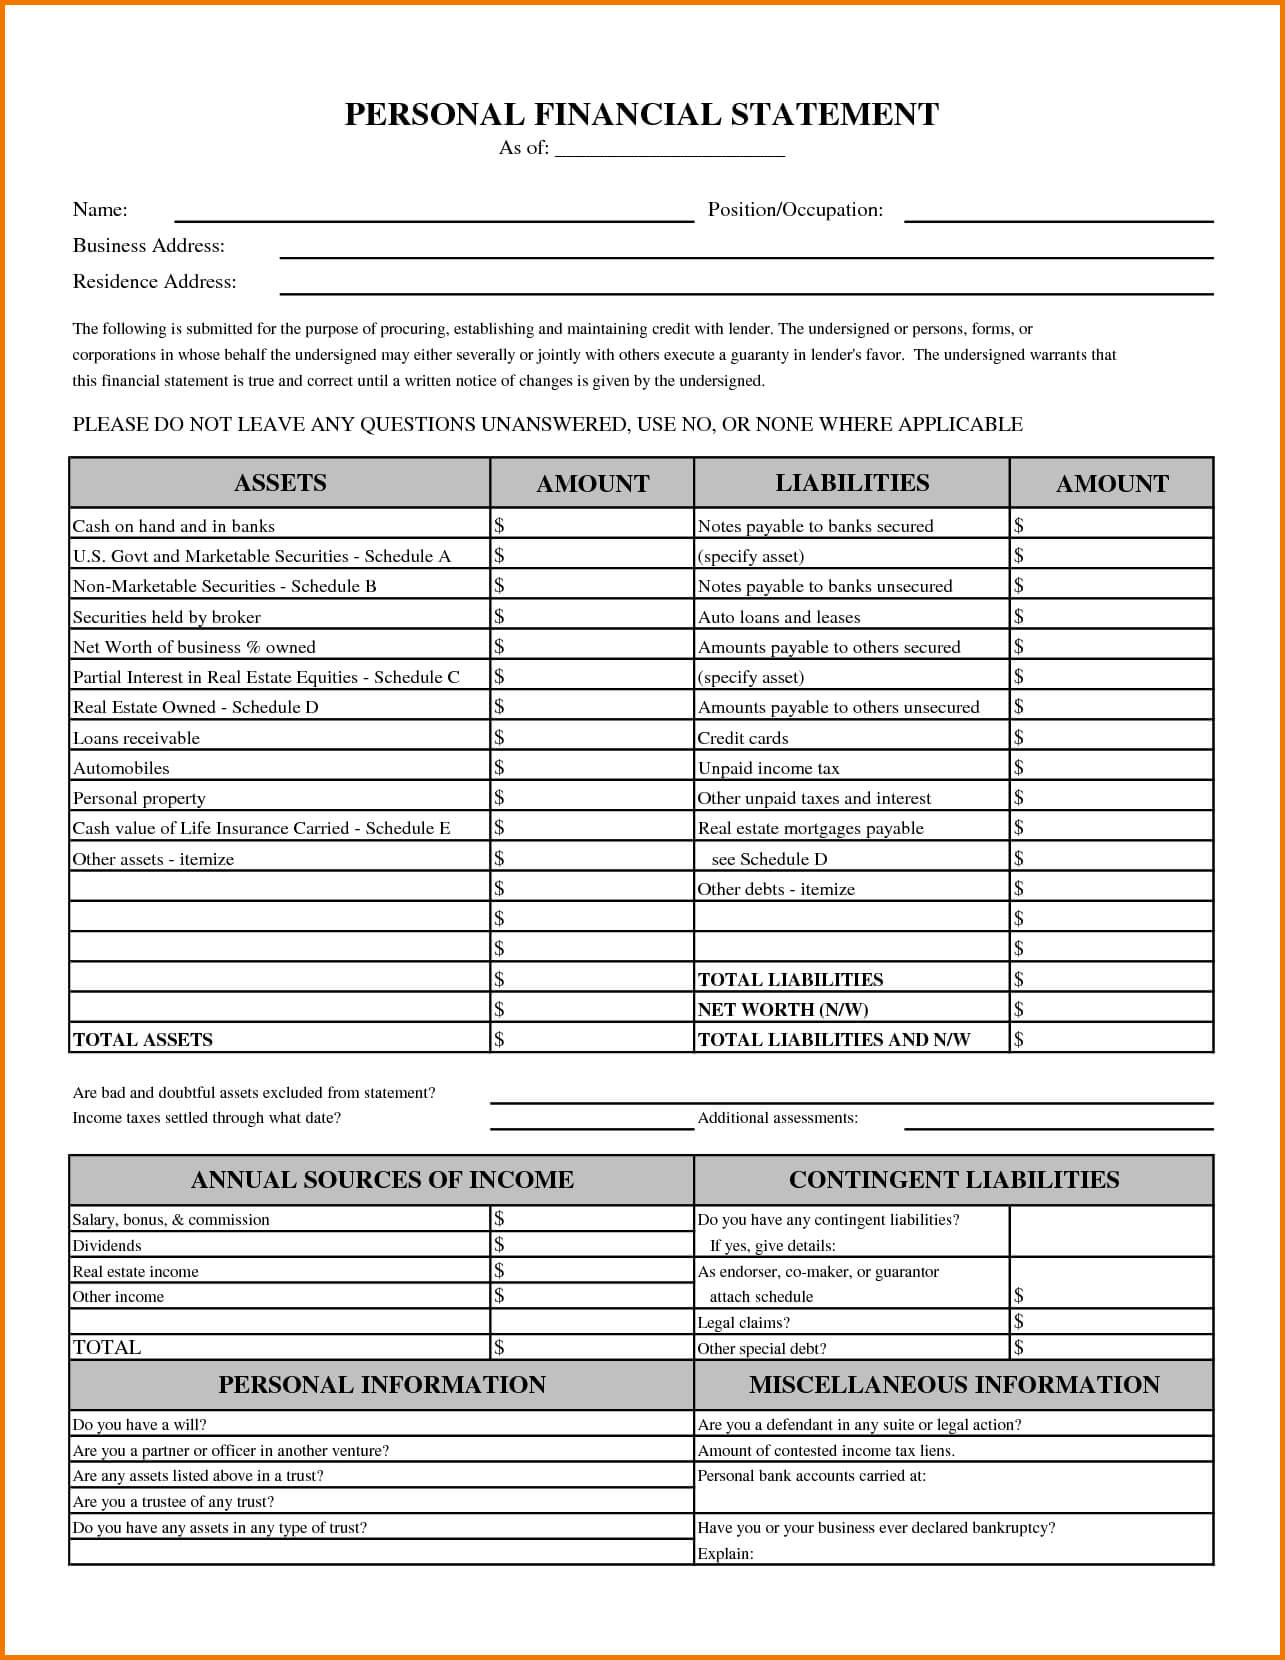 002 Personal Financial Statement Template Ideas Rare Excel With Regard To Blank Personal Financial Statement Template